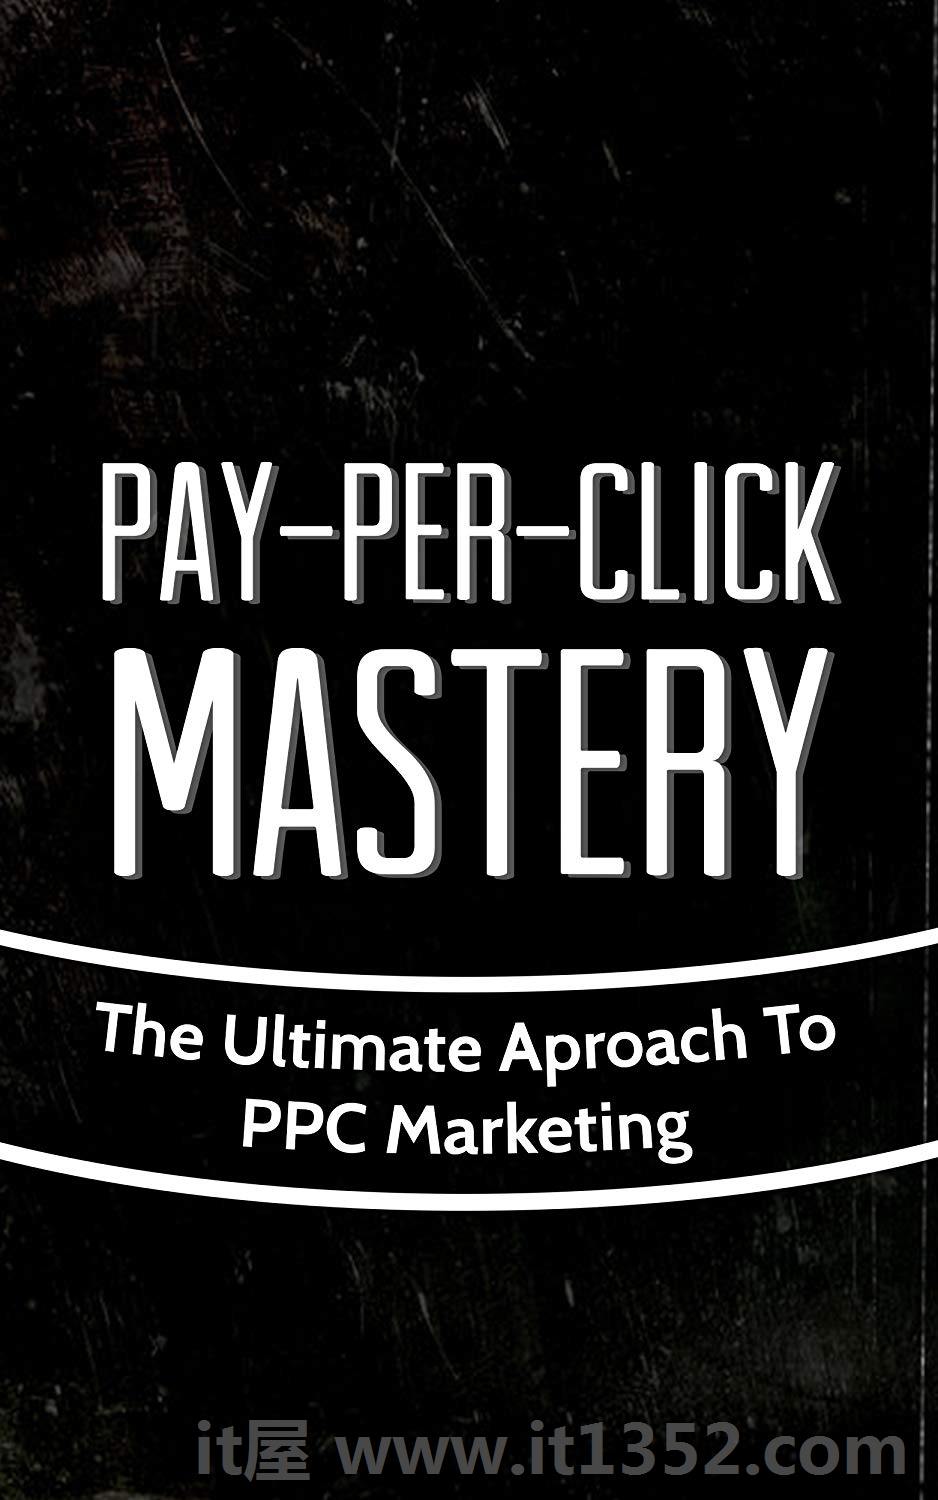 Pay-Per-Click Mastery: The Ultimate Aproach To PPC Marketing (Google, Search Engine, Adwords Book 1)